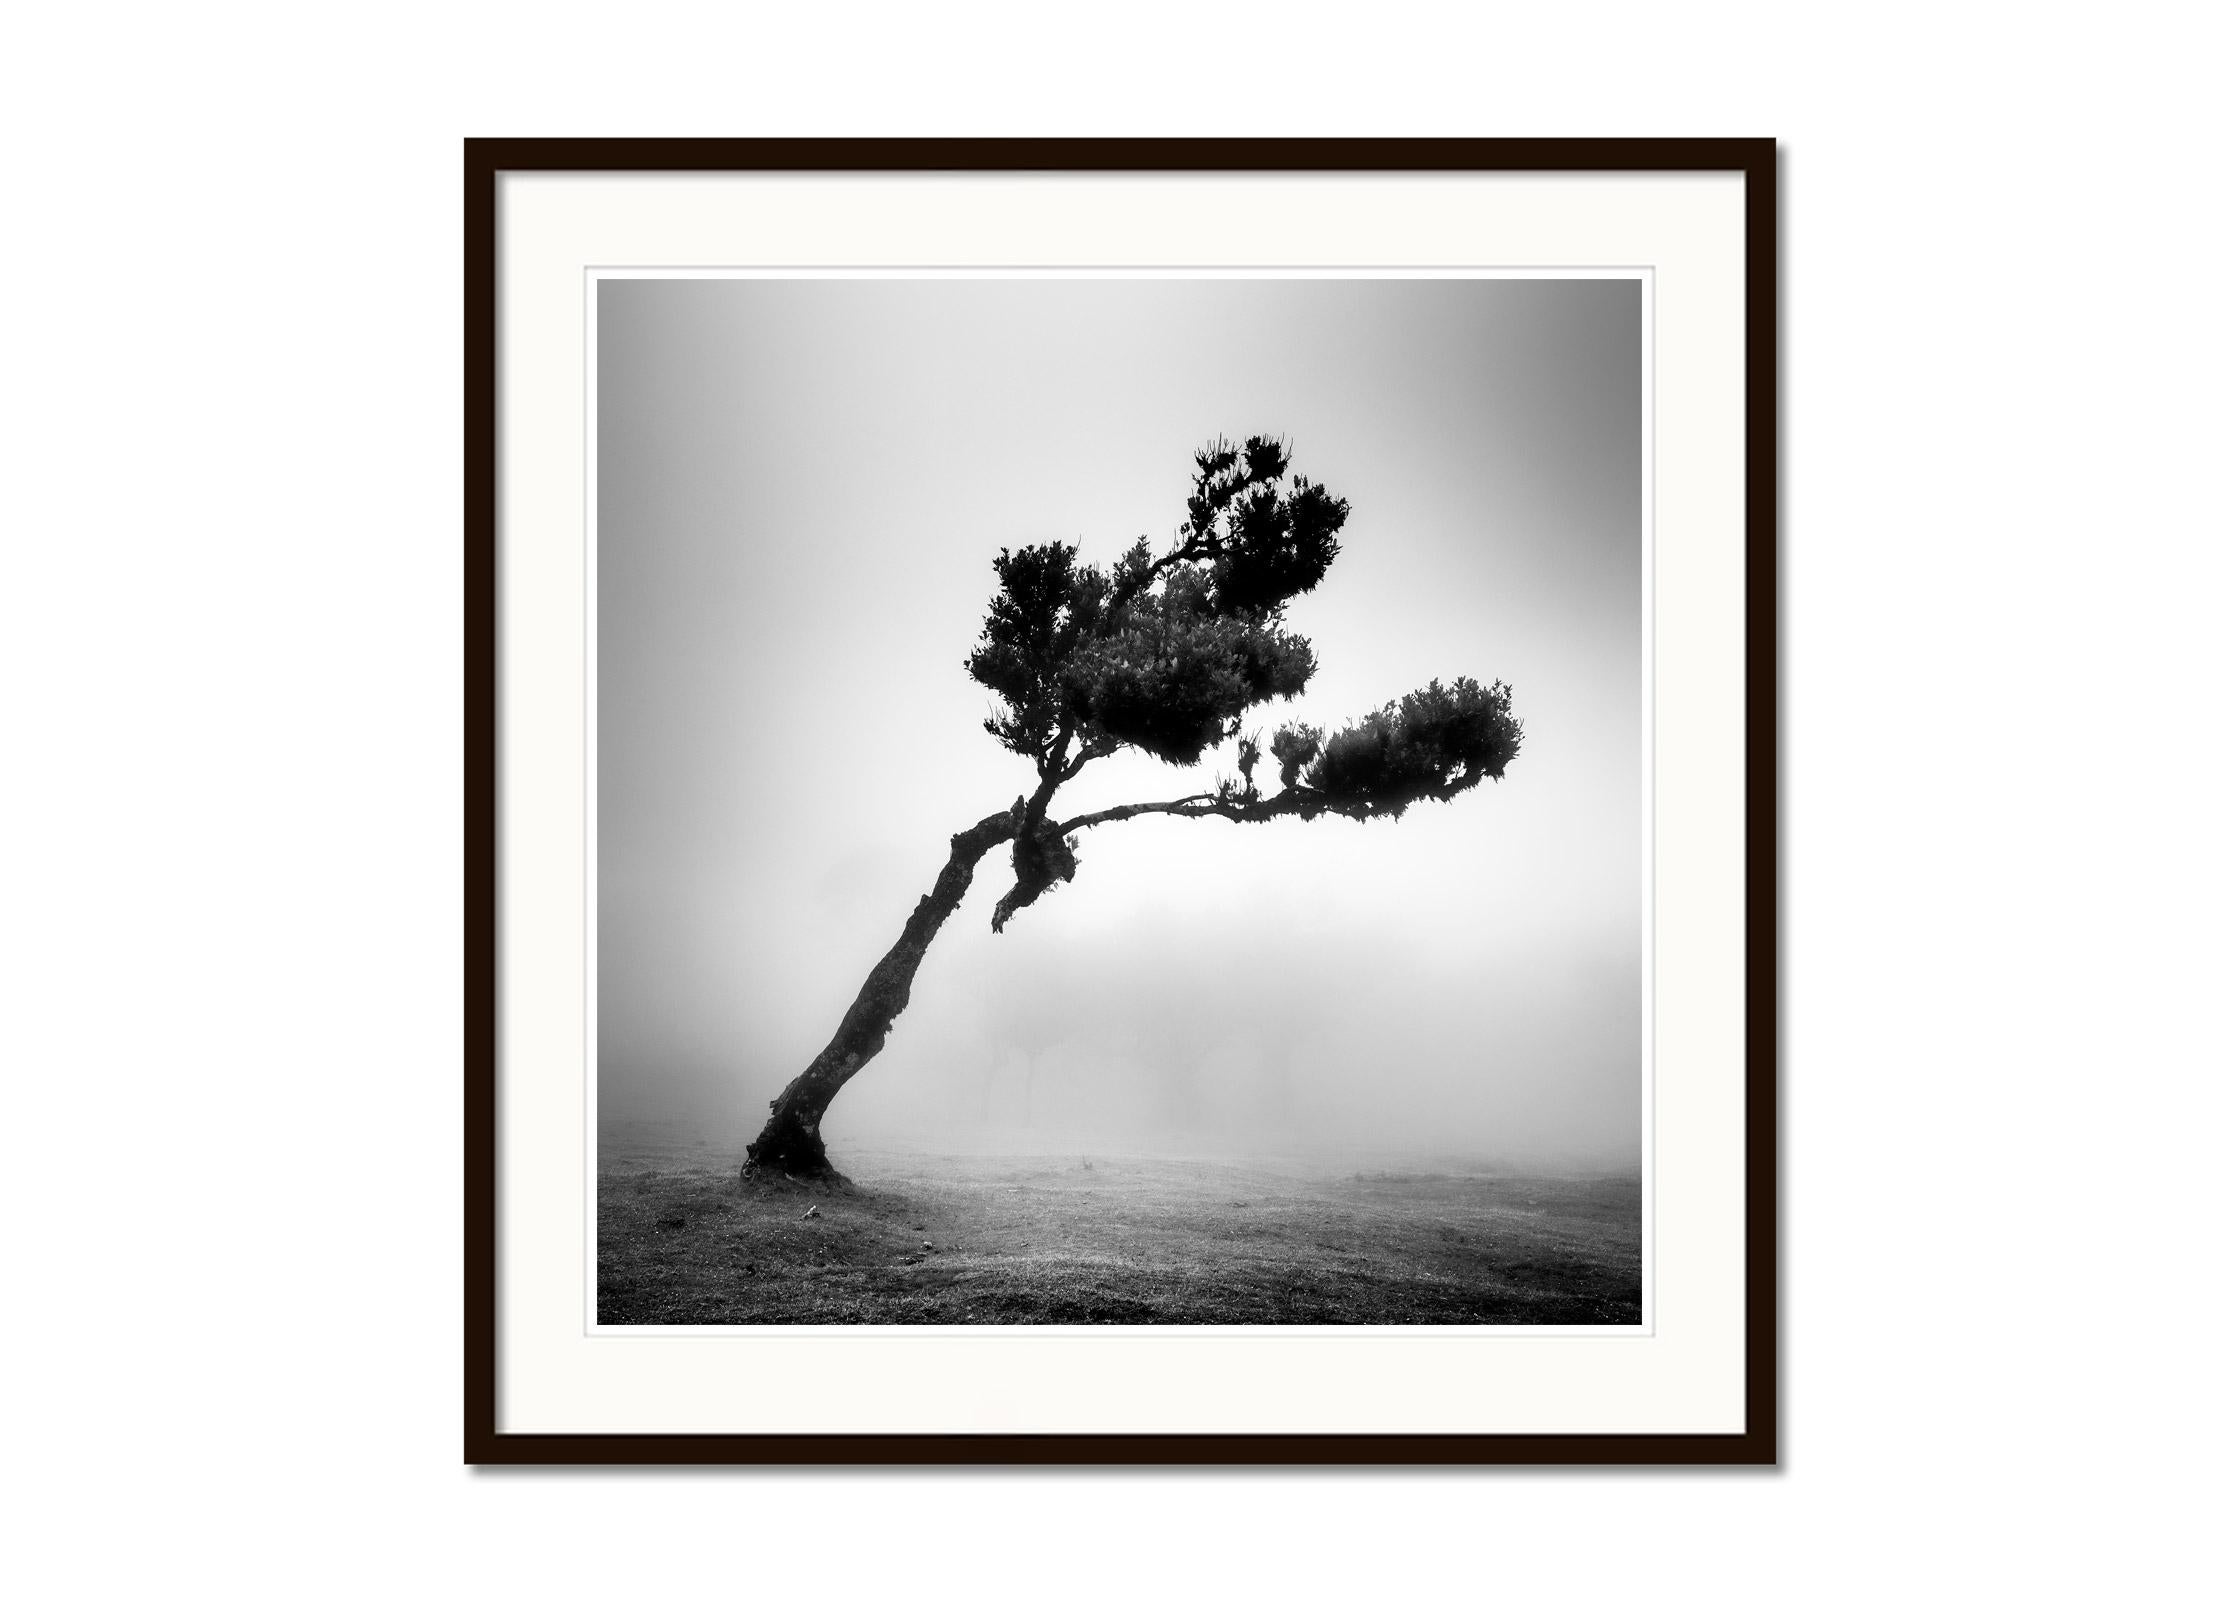 Deer in fairy Forest, mystical Tree, Madeira, black & white landscape art photo  - Gray Landscape Photograph by Gerald Berghammer